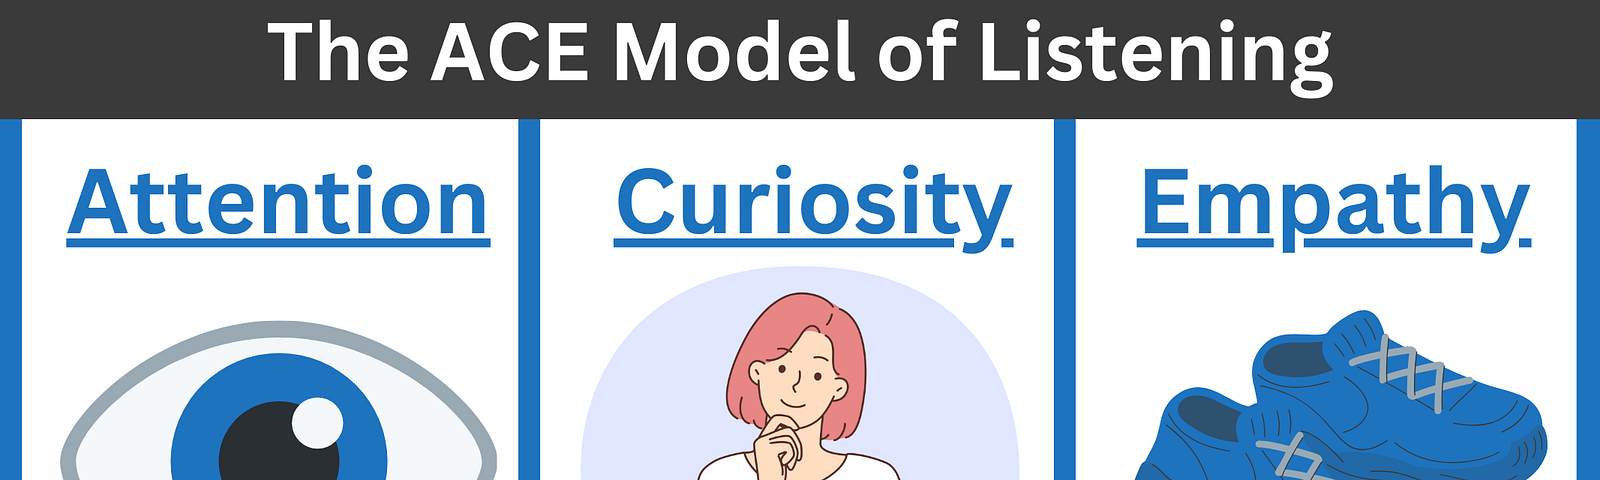 This image depicts the ACE Model of Listening: (1) Attention, depicted with an eyeball, (2) Curiosity, depicted with an image of a woman holding her chin, and (3) Empathy, depicted with a pair of sneakers so you can put yourself in the speaker’s shoes